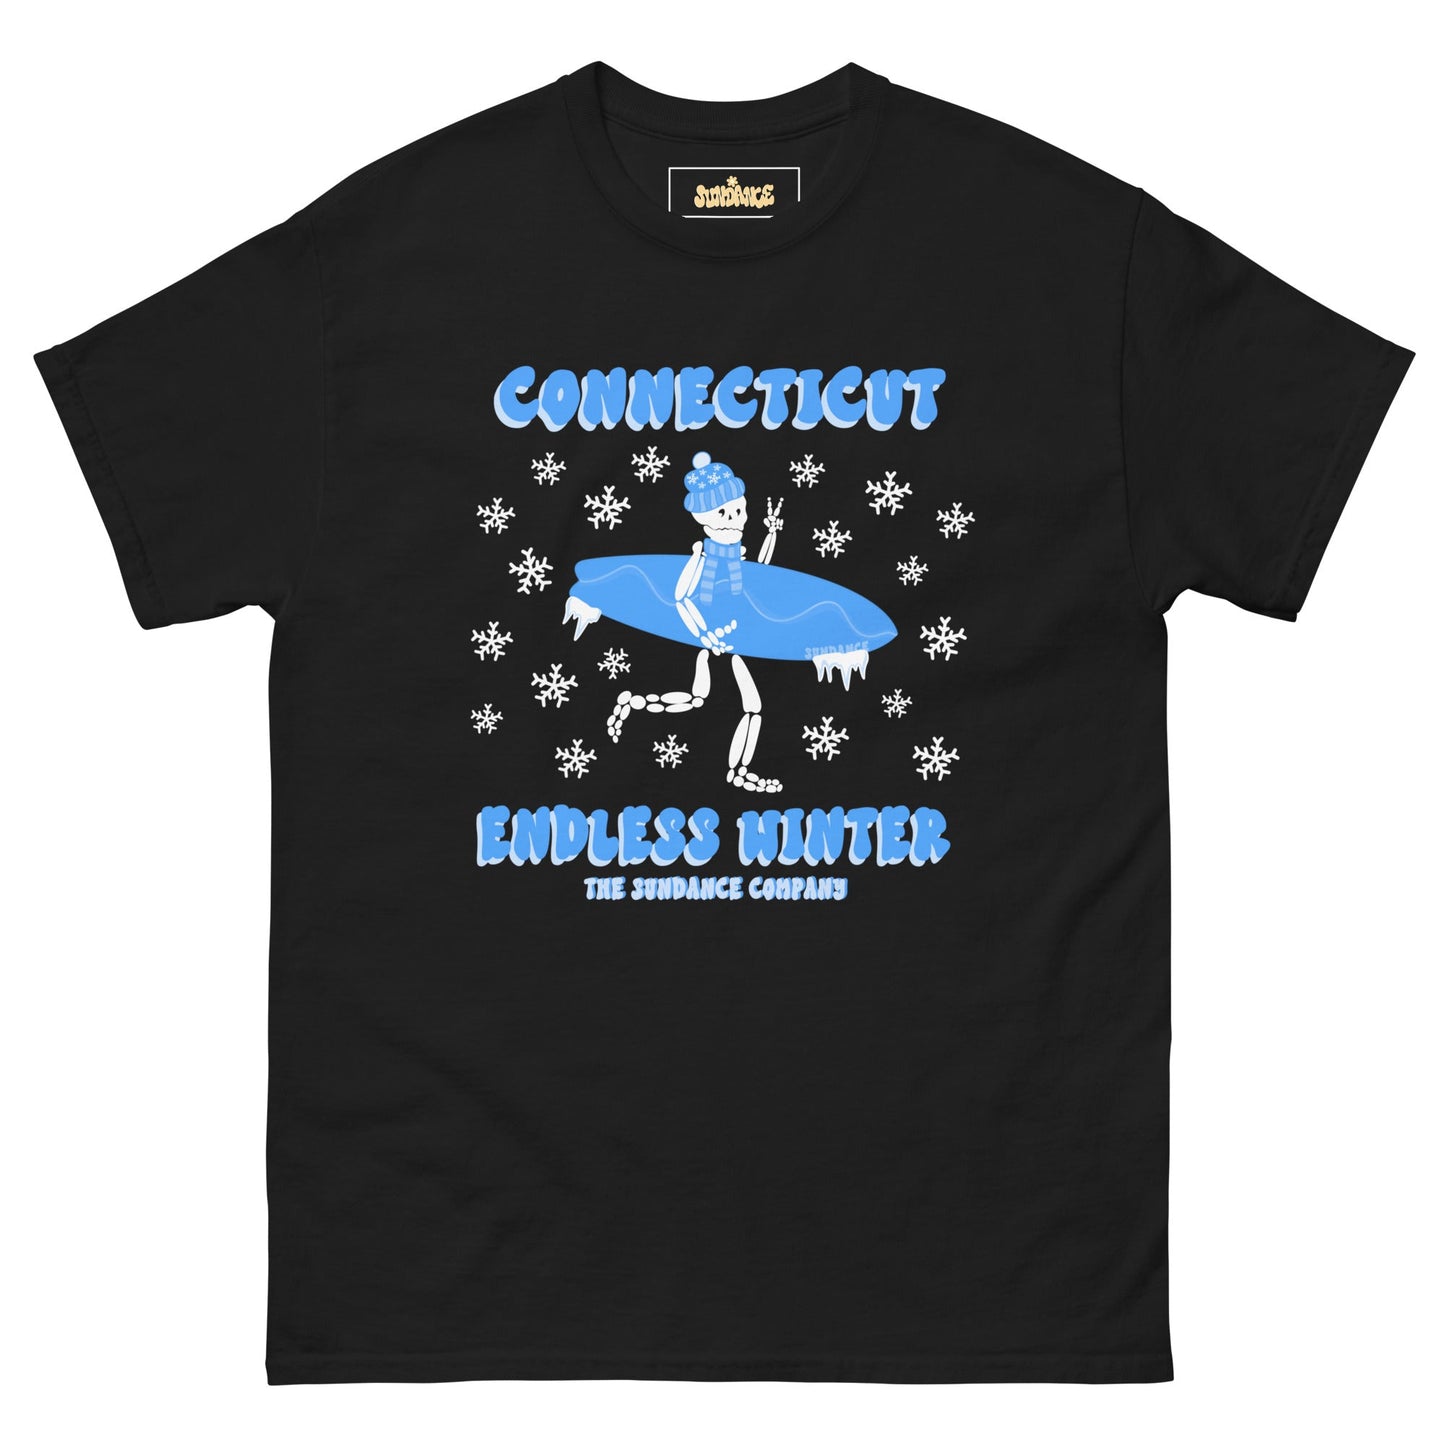 Connecticut Endless Winter Tee